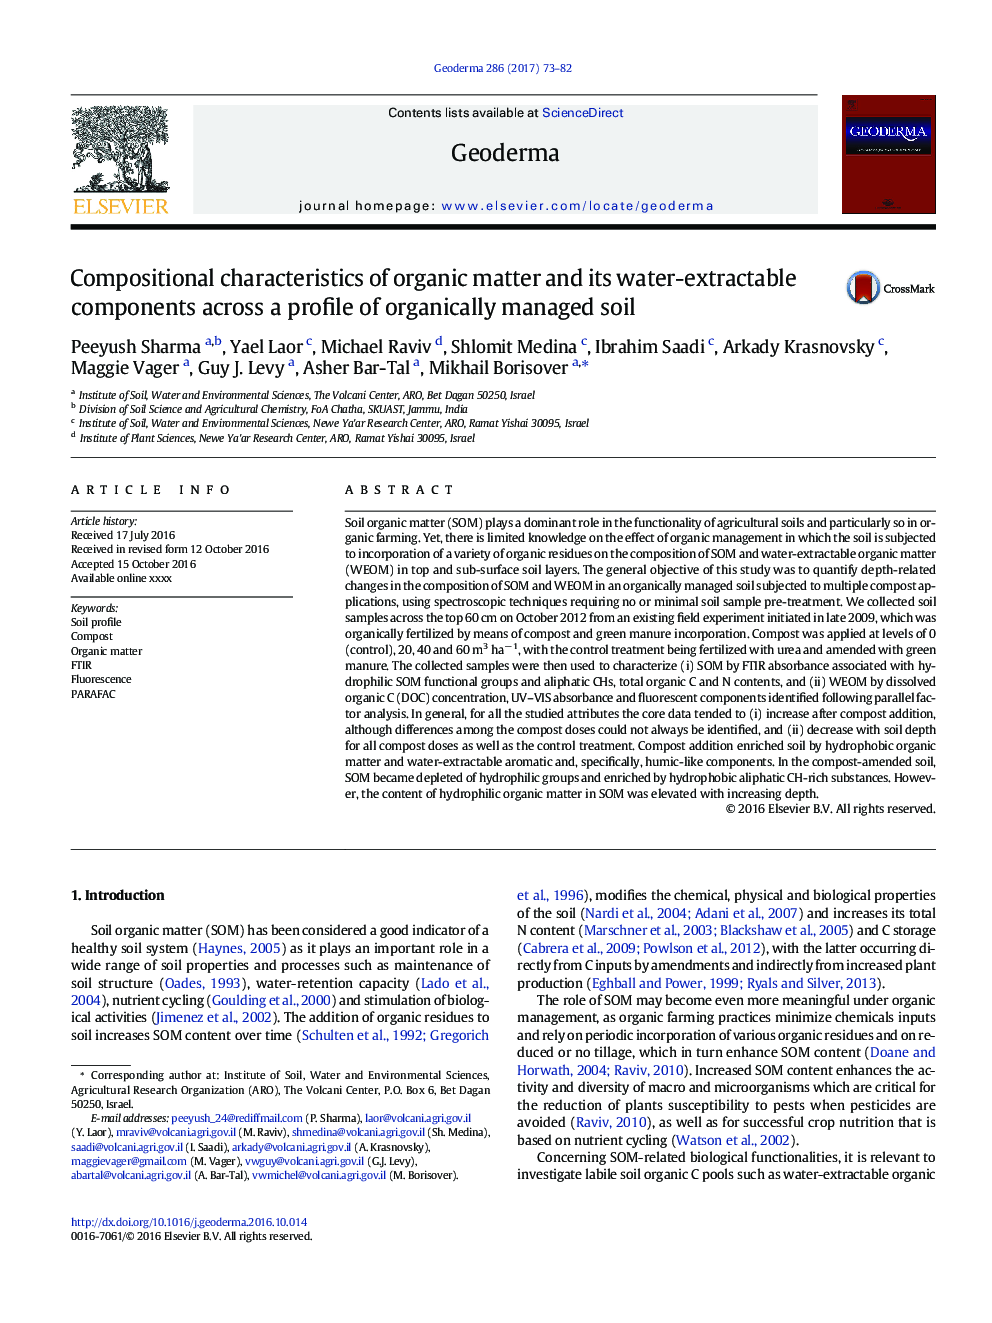 Compositional characteristics of organic matter and its water-extractable components across a profile of organically managed soil